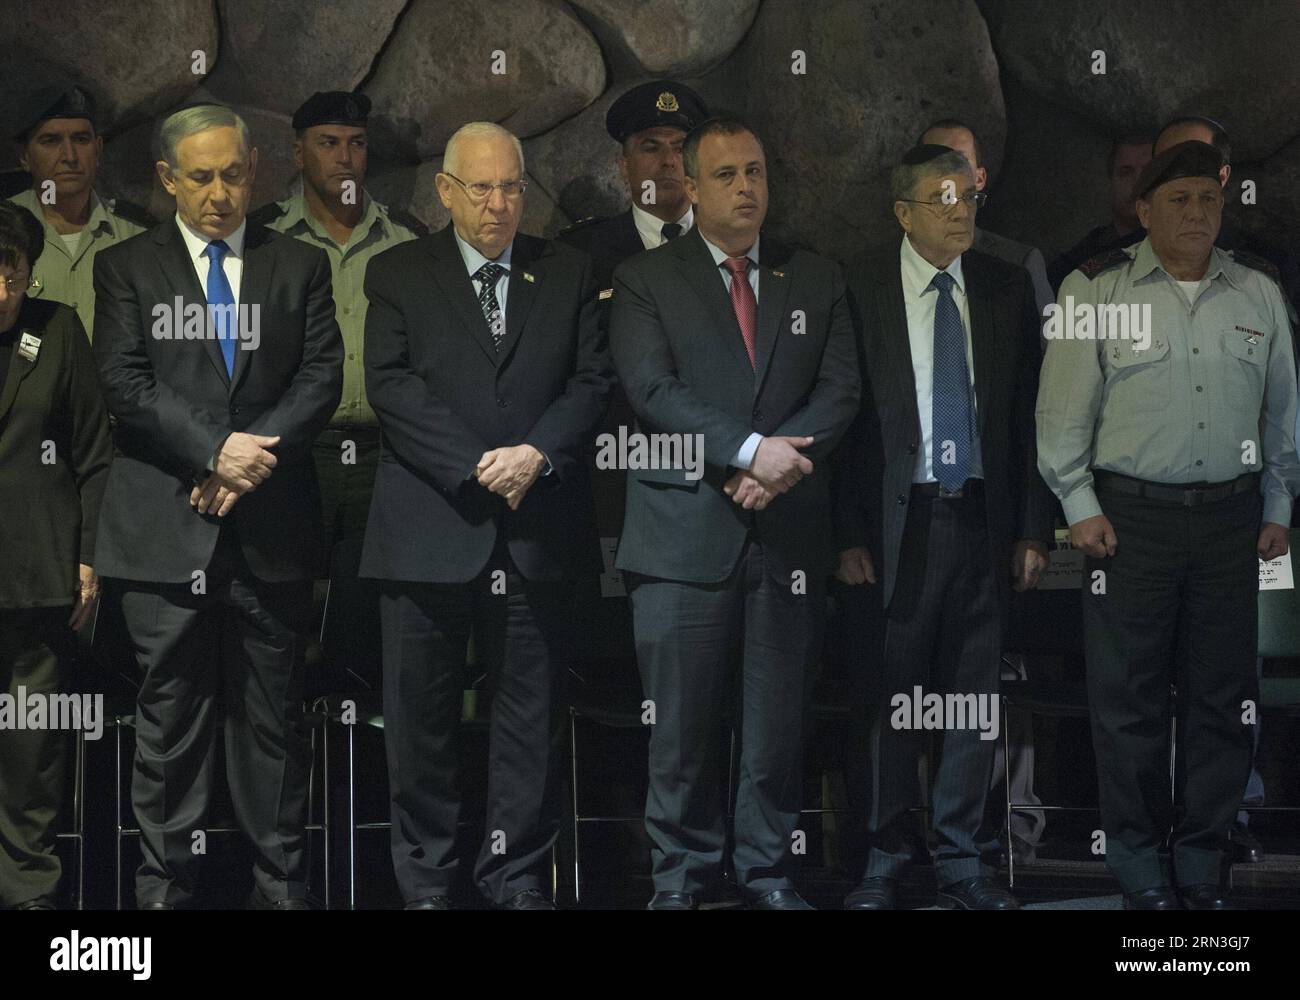 (150416) -- JERUSALEM, April 16, 2015 -- Israeli Prime Minister Benjamin Netanyahu (2nd L, front) and President Reuven Rivlin (3rd L, front) mourn for holocaust victims during the Holocaust Remembrance Day at the Yad Vashem Holocaust Memorial Museum in Jerusalem, on April 16, 2015. From Wednesday sunset to Thursday, Israel officially commemorated the genocide of six million Jews by Nazi Germany during the World War II. GPO/) (djj) MIDEAST-JERUSALEM-HOLOCAUST REMEMBRANCE DAY AmosxBenxGershom PUBLICATIONxNOTxINxCHN   Jerusalem April 16 2015 Israeli Prime Ministers Benjamin Netanyahu 2nd l Front Stock Photo